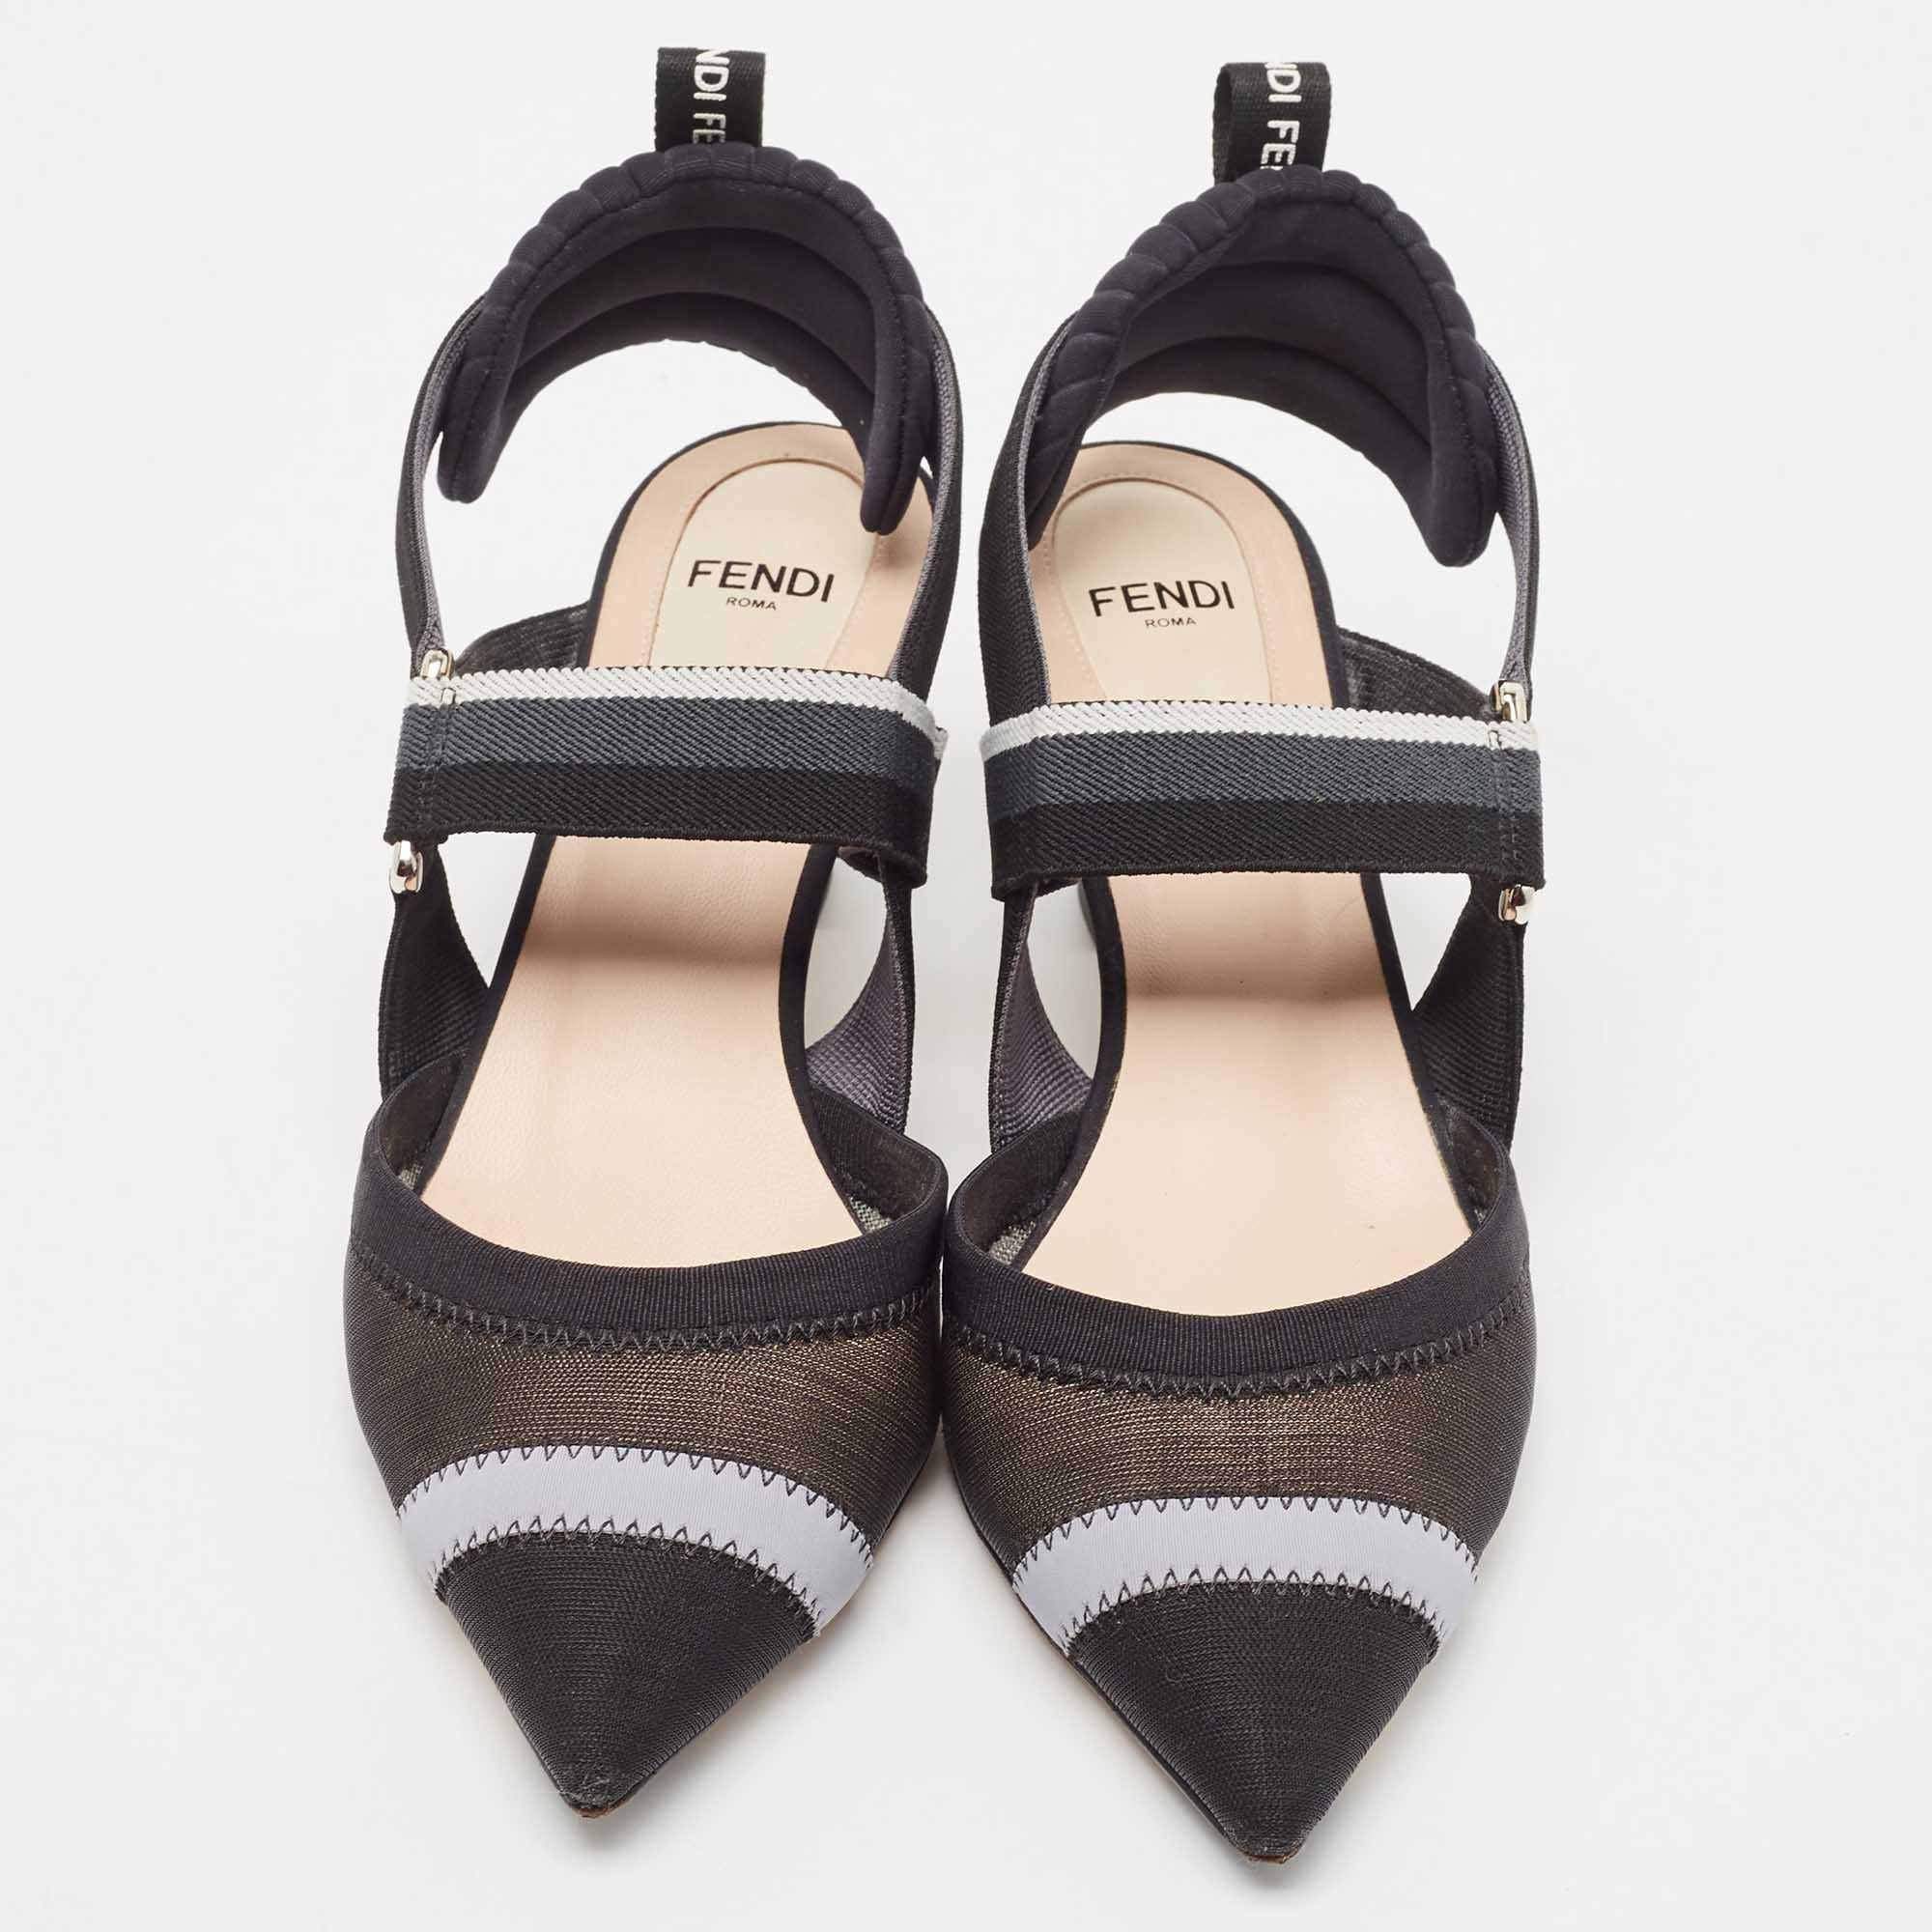 Wonderfully crafted shoes added with notable elements to fit well and pair perfectly with all your plans. Make these Fendi pumps yours today!

Includes: Original Dustbag

